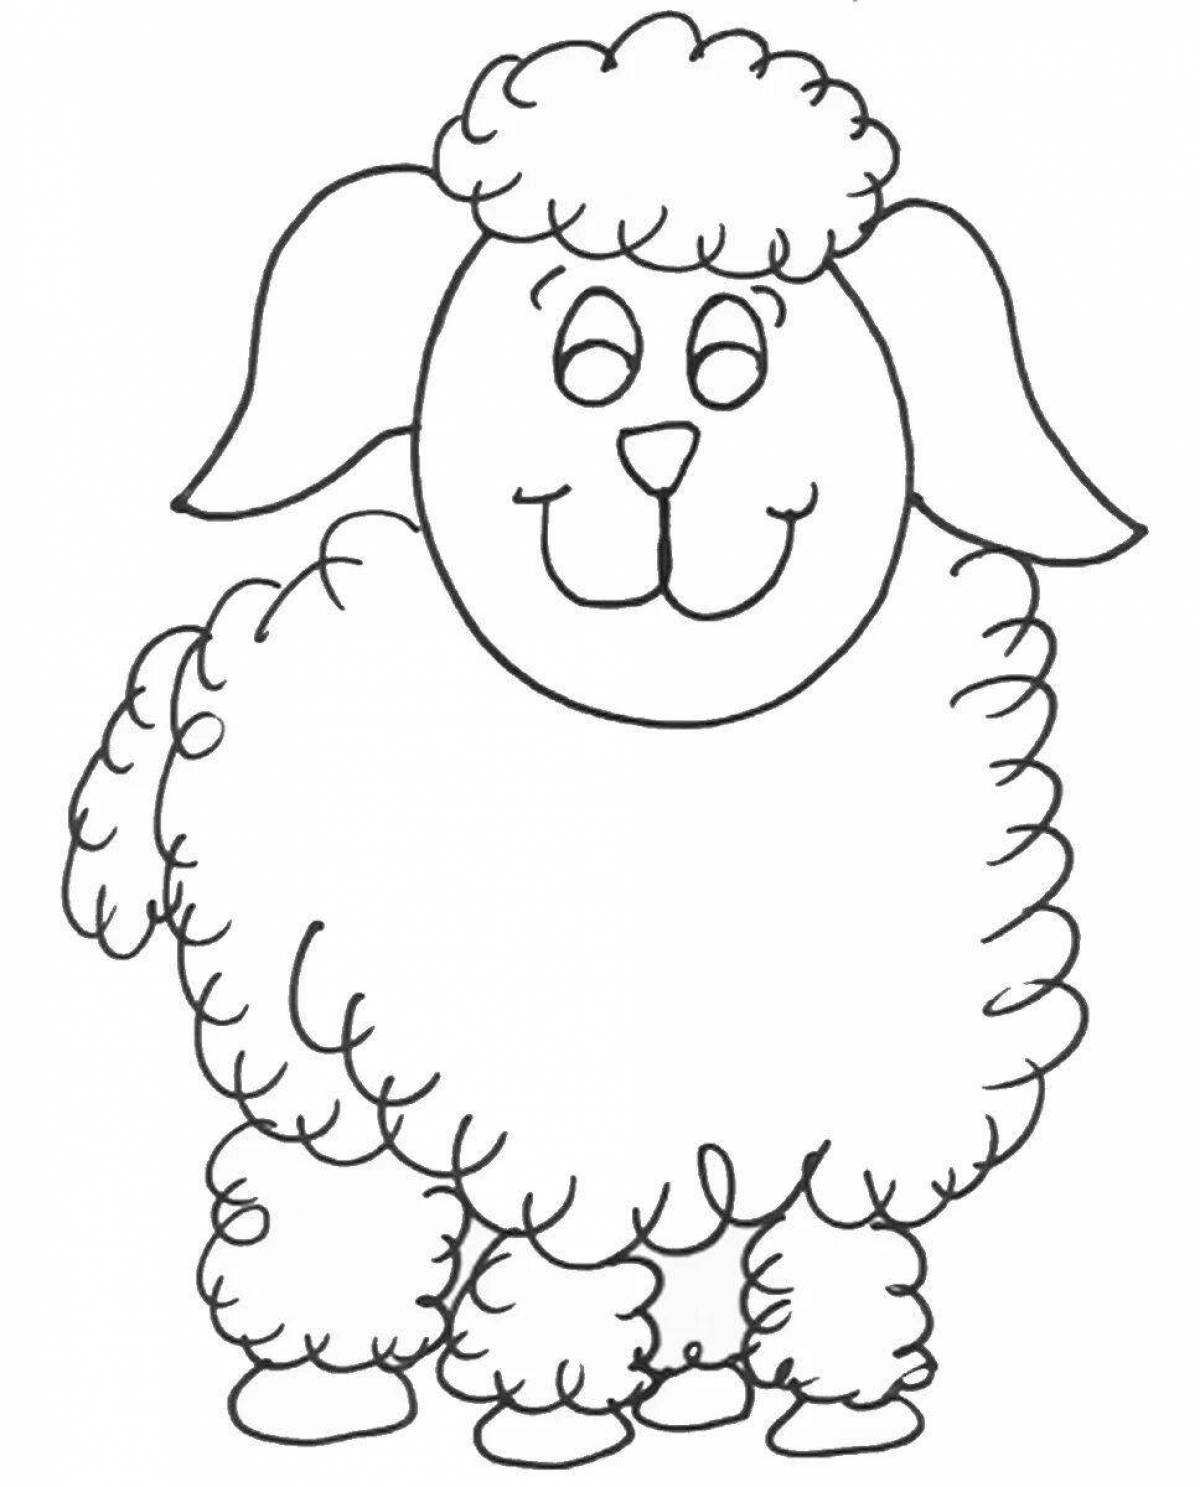 Witty lamb coloring book for kids 2-3 years old